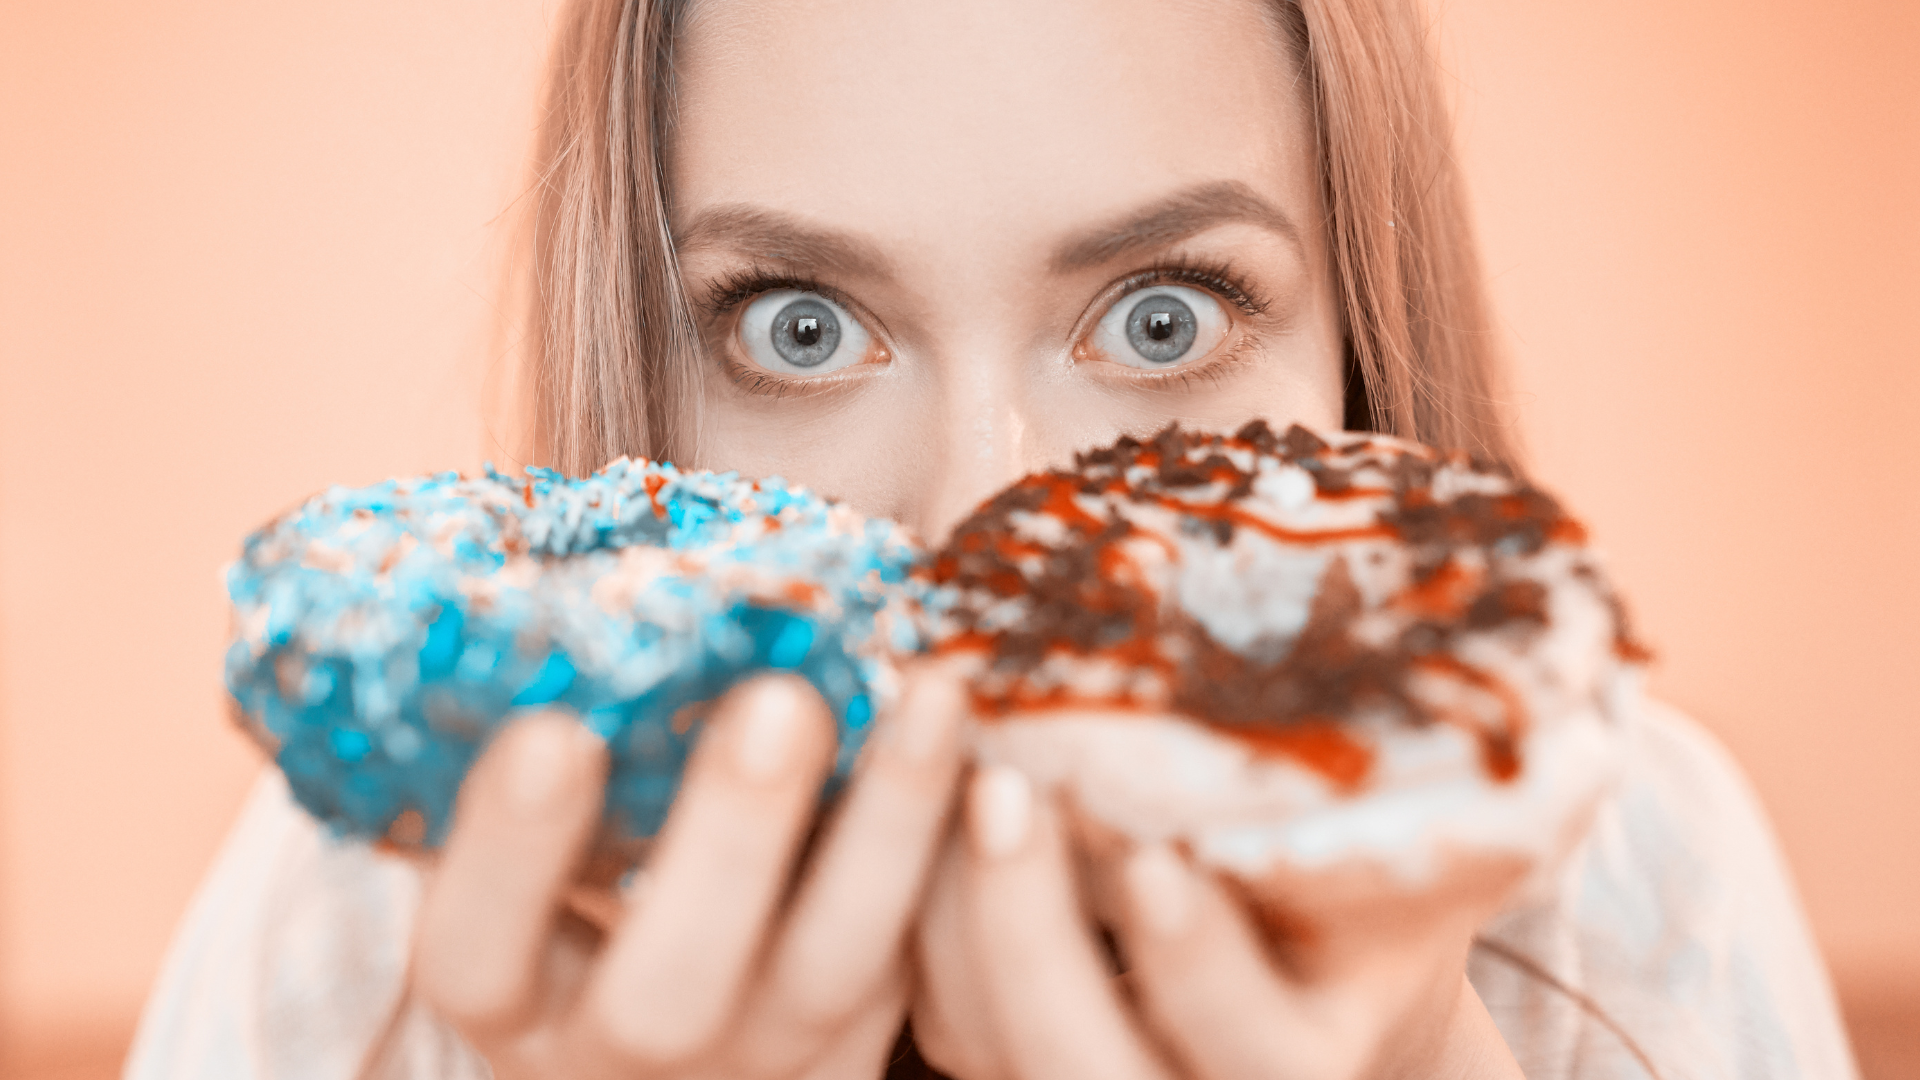 The Impact of Sugar on Your Teeth - Insights from Orion Dental